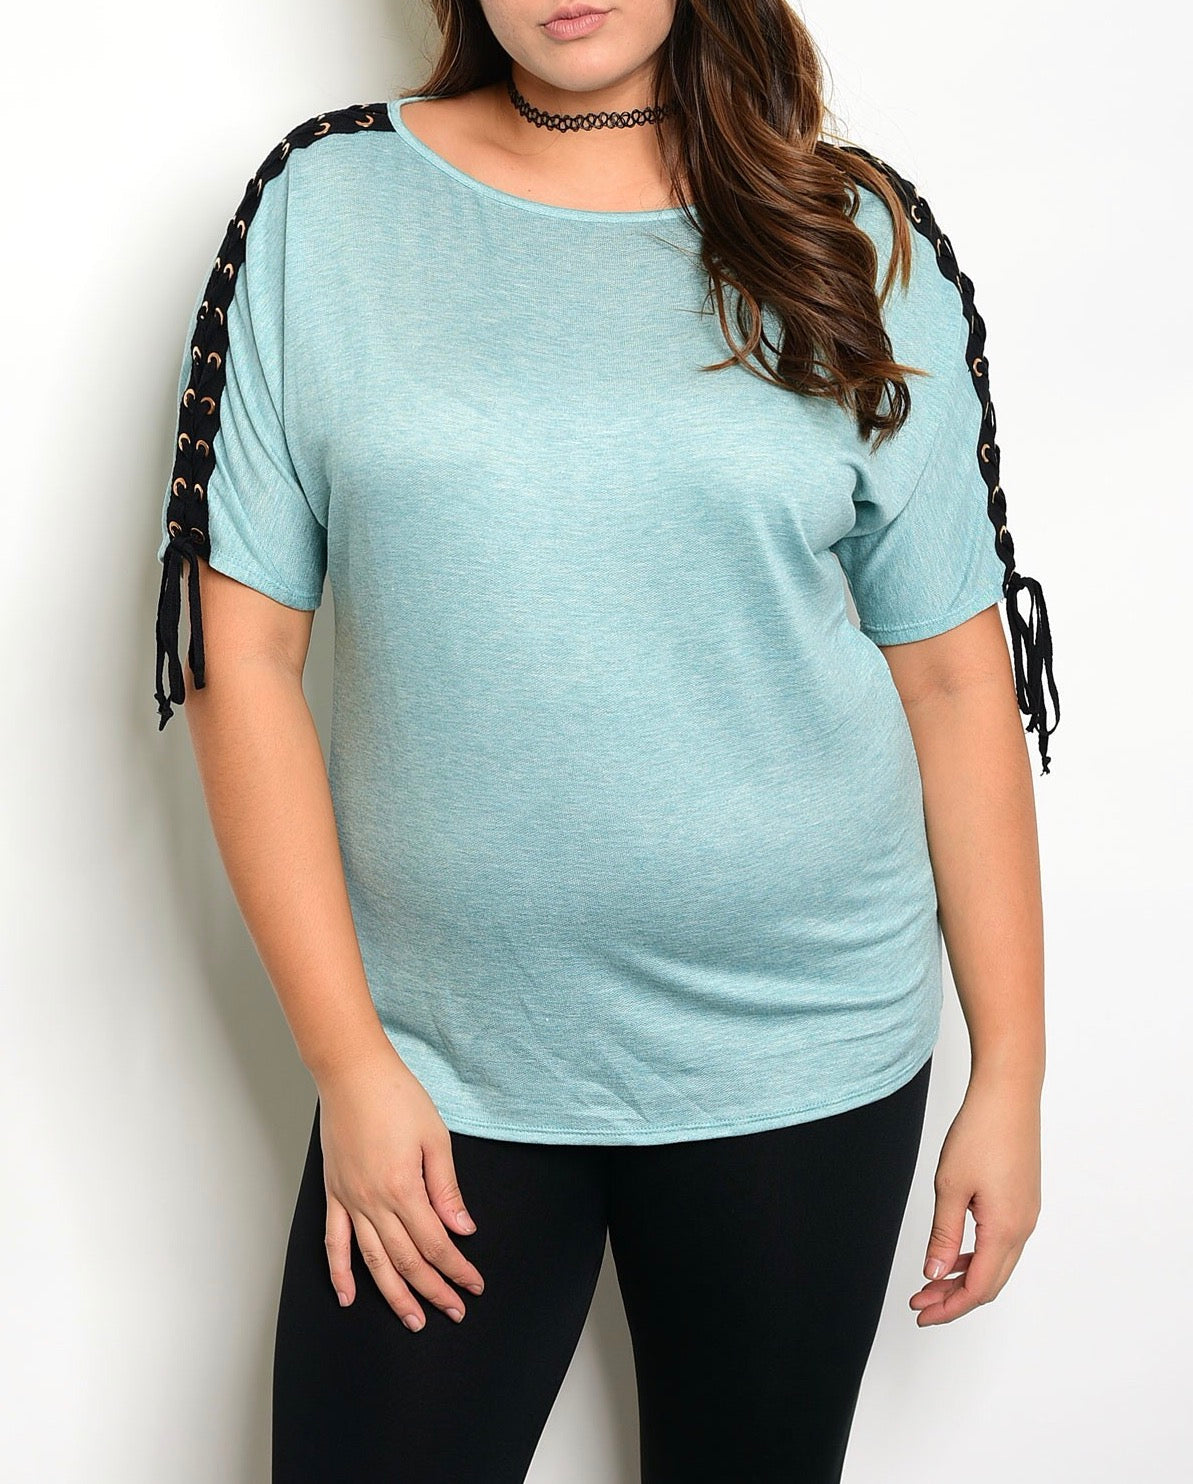 Plus Size Aqua Shirt Top Lace Up Tie Casual 3/4 Sleeve Womens